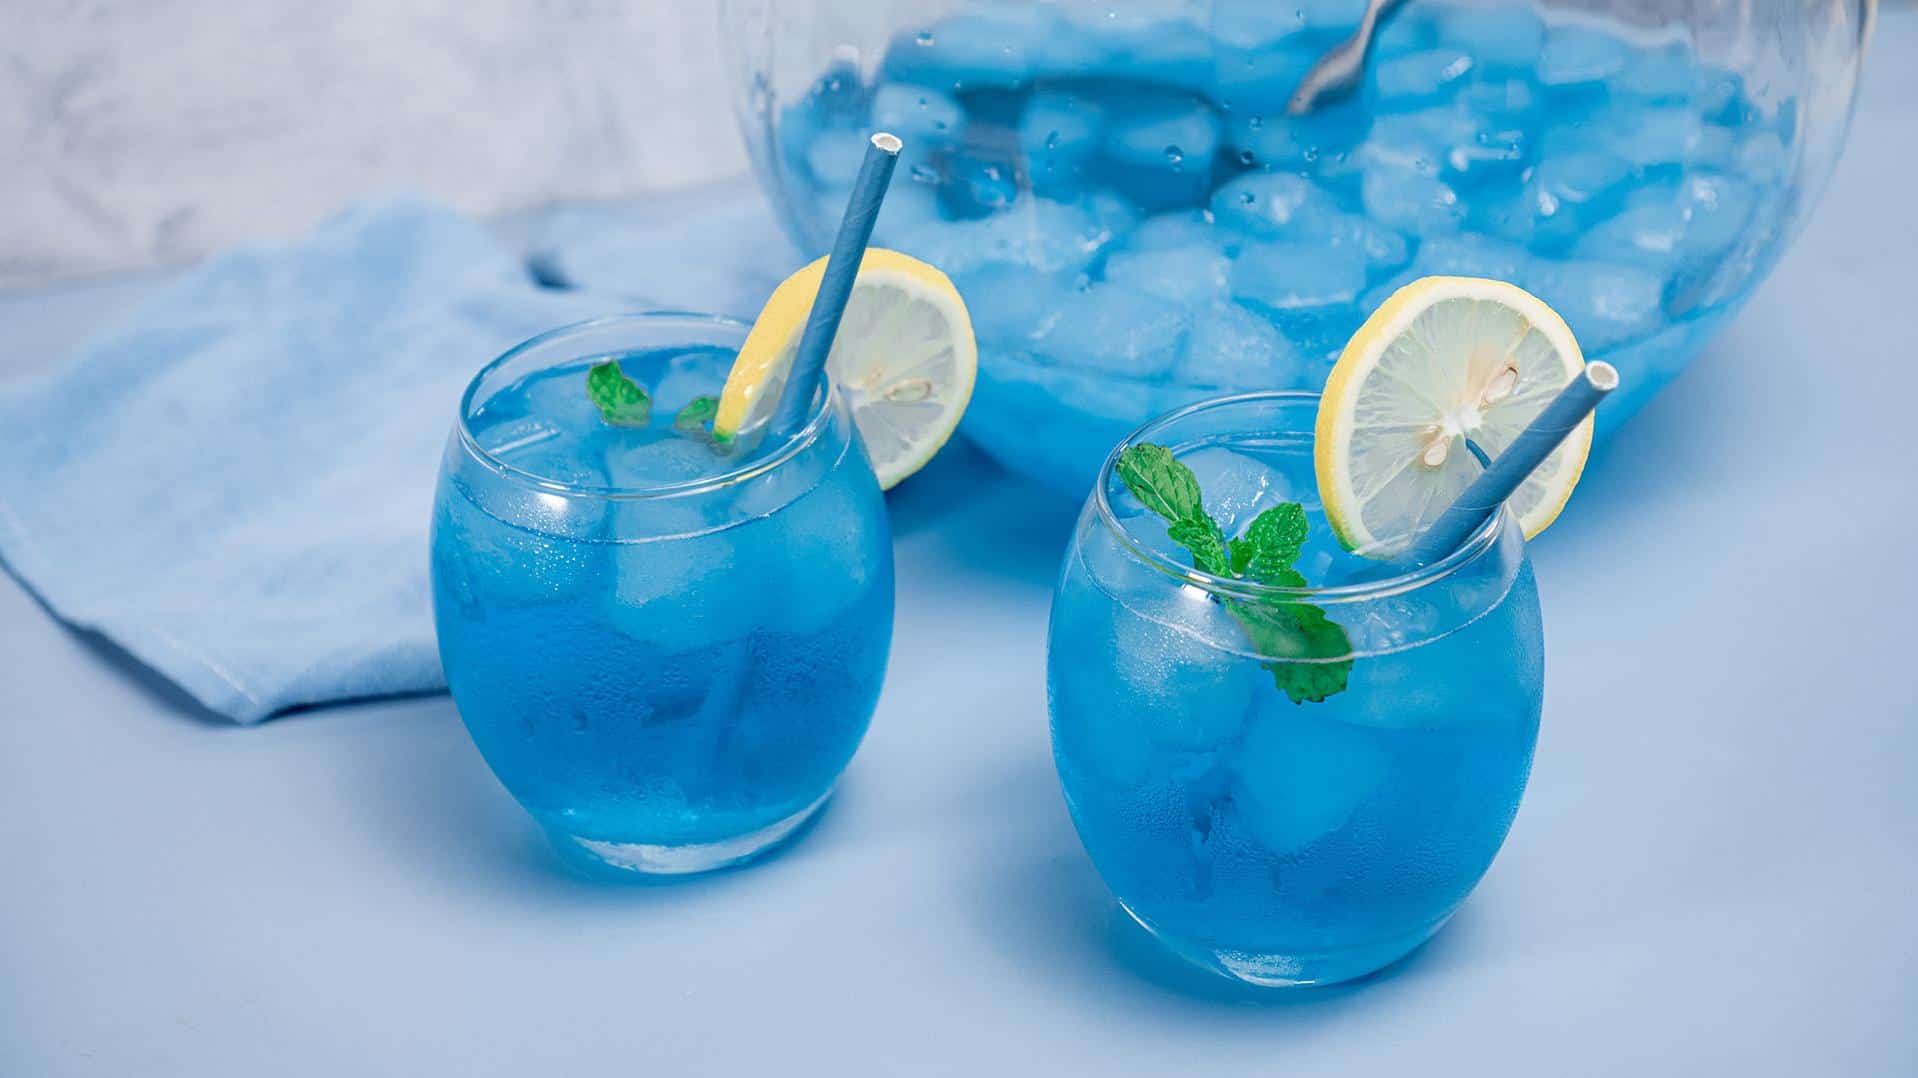  The perfect drink for your next Zeta Phi Beta sorority event!